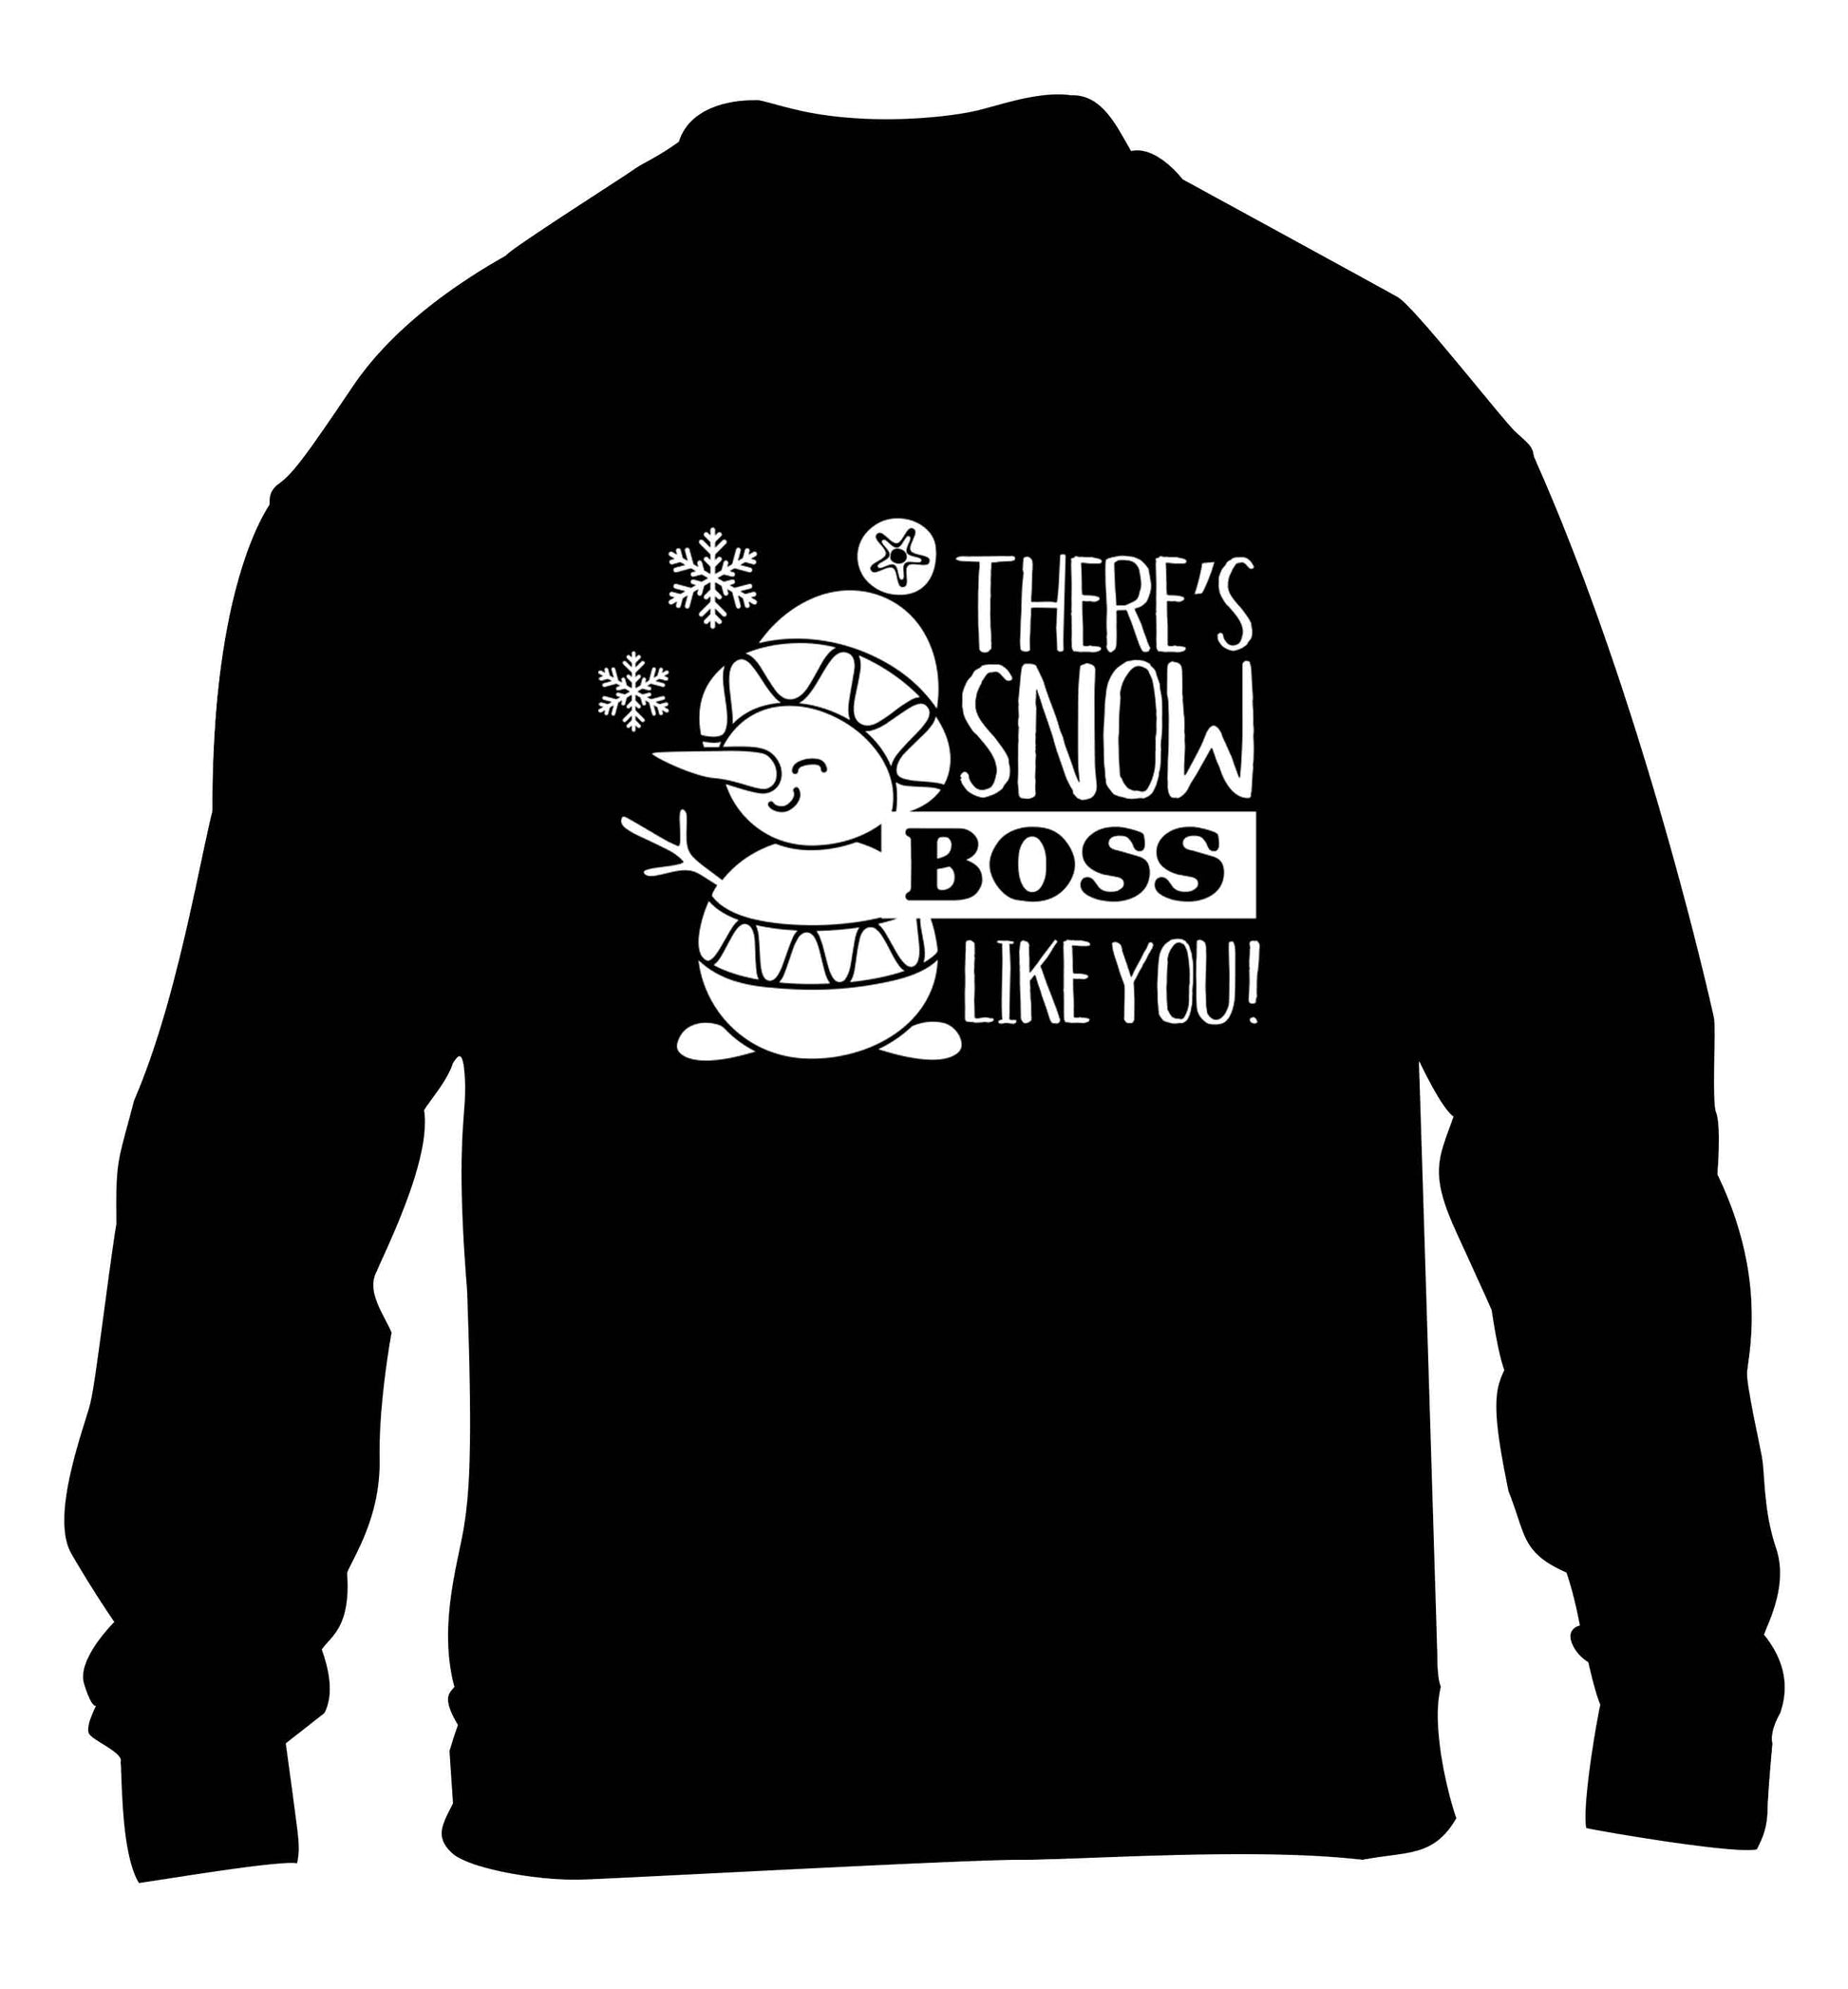 There's snow boss like you children's black sweater 12-13 Years